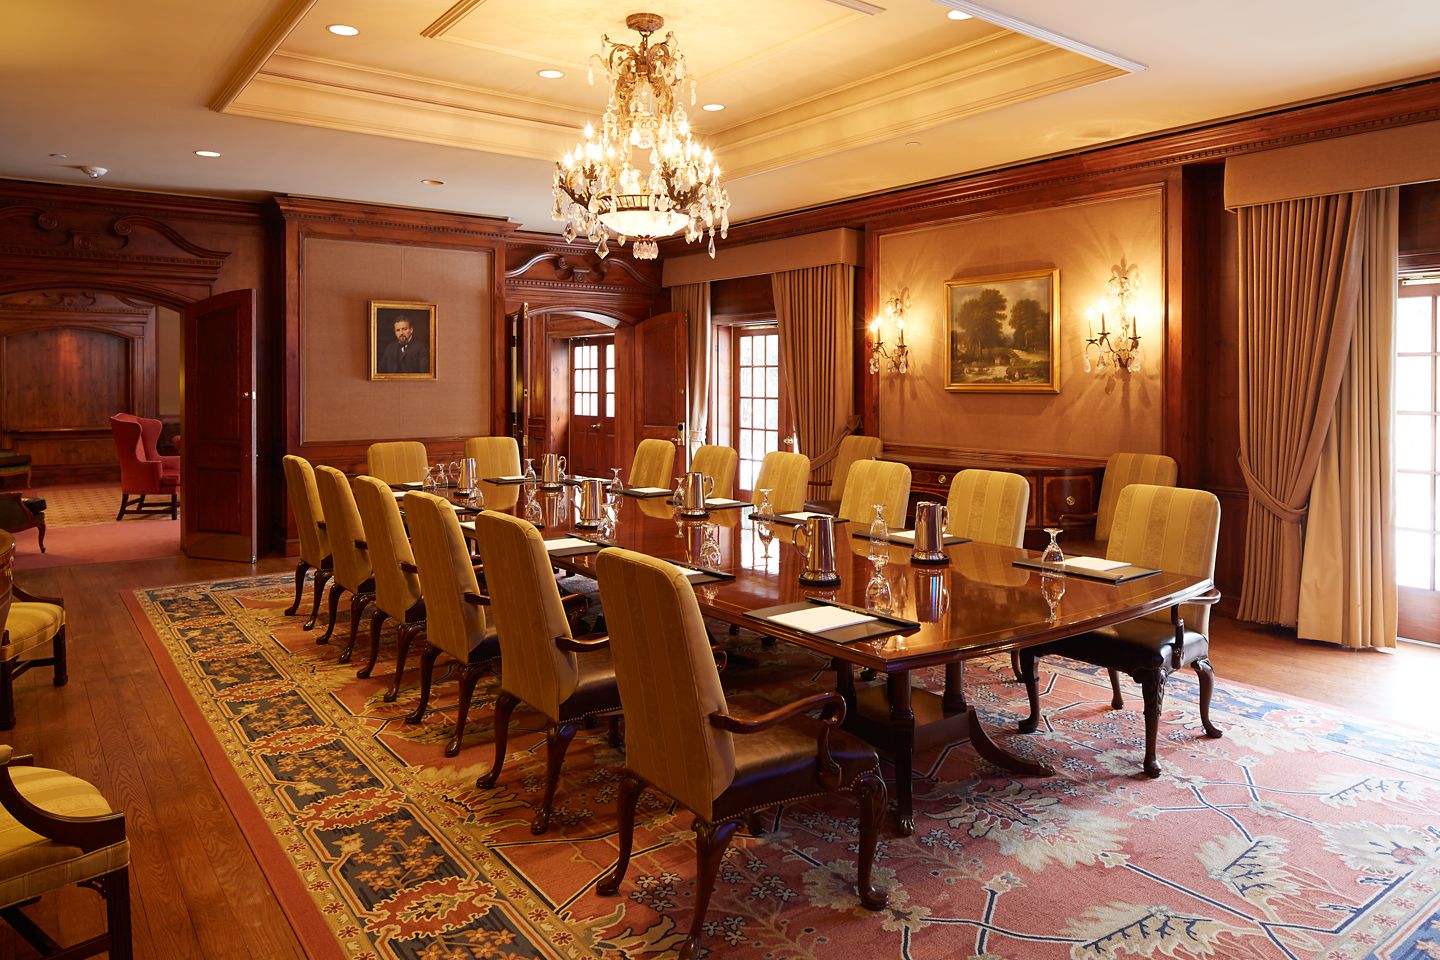 Founder's Room at The American Club